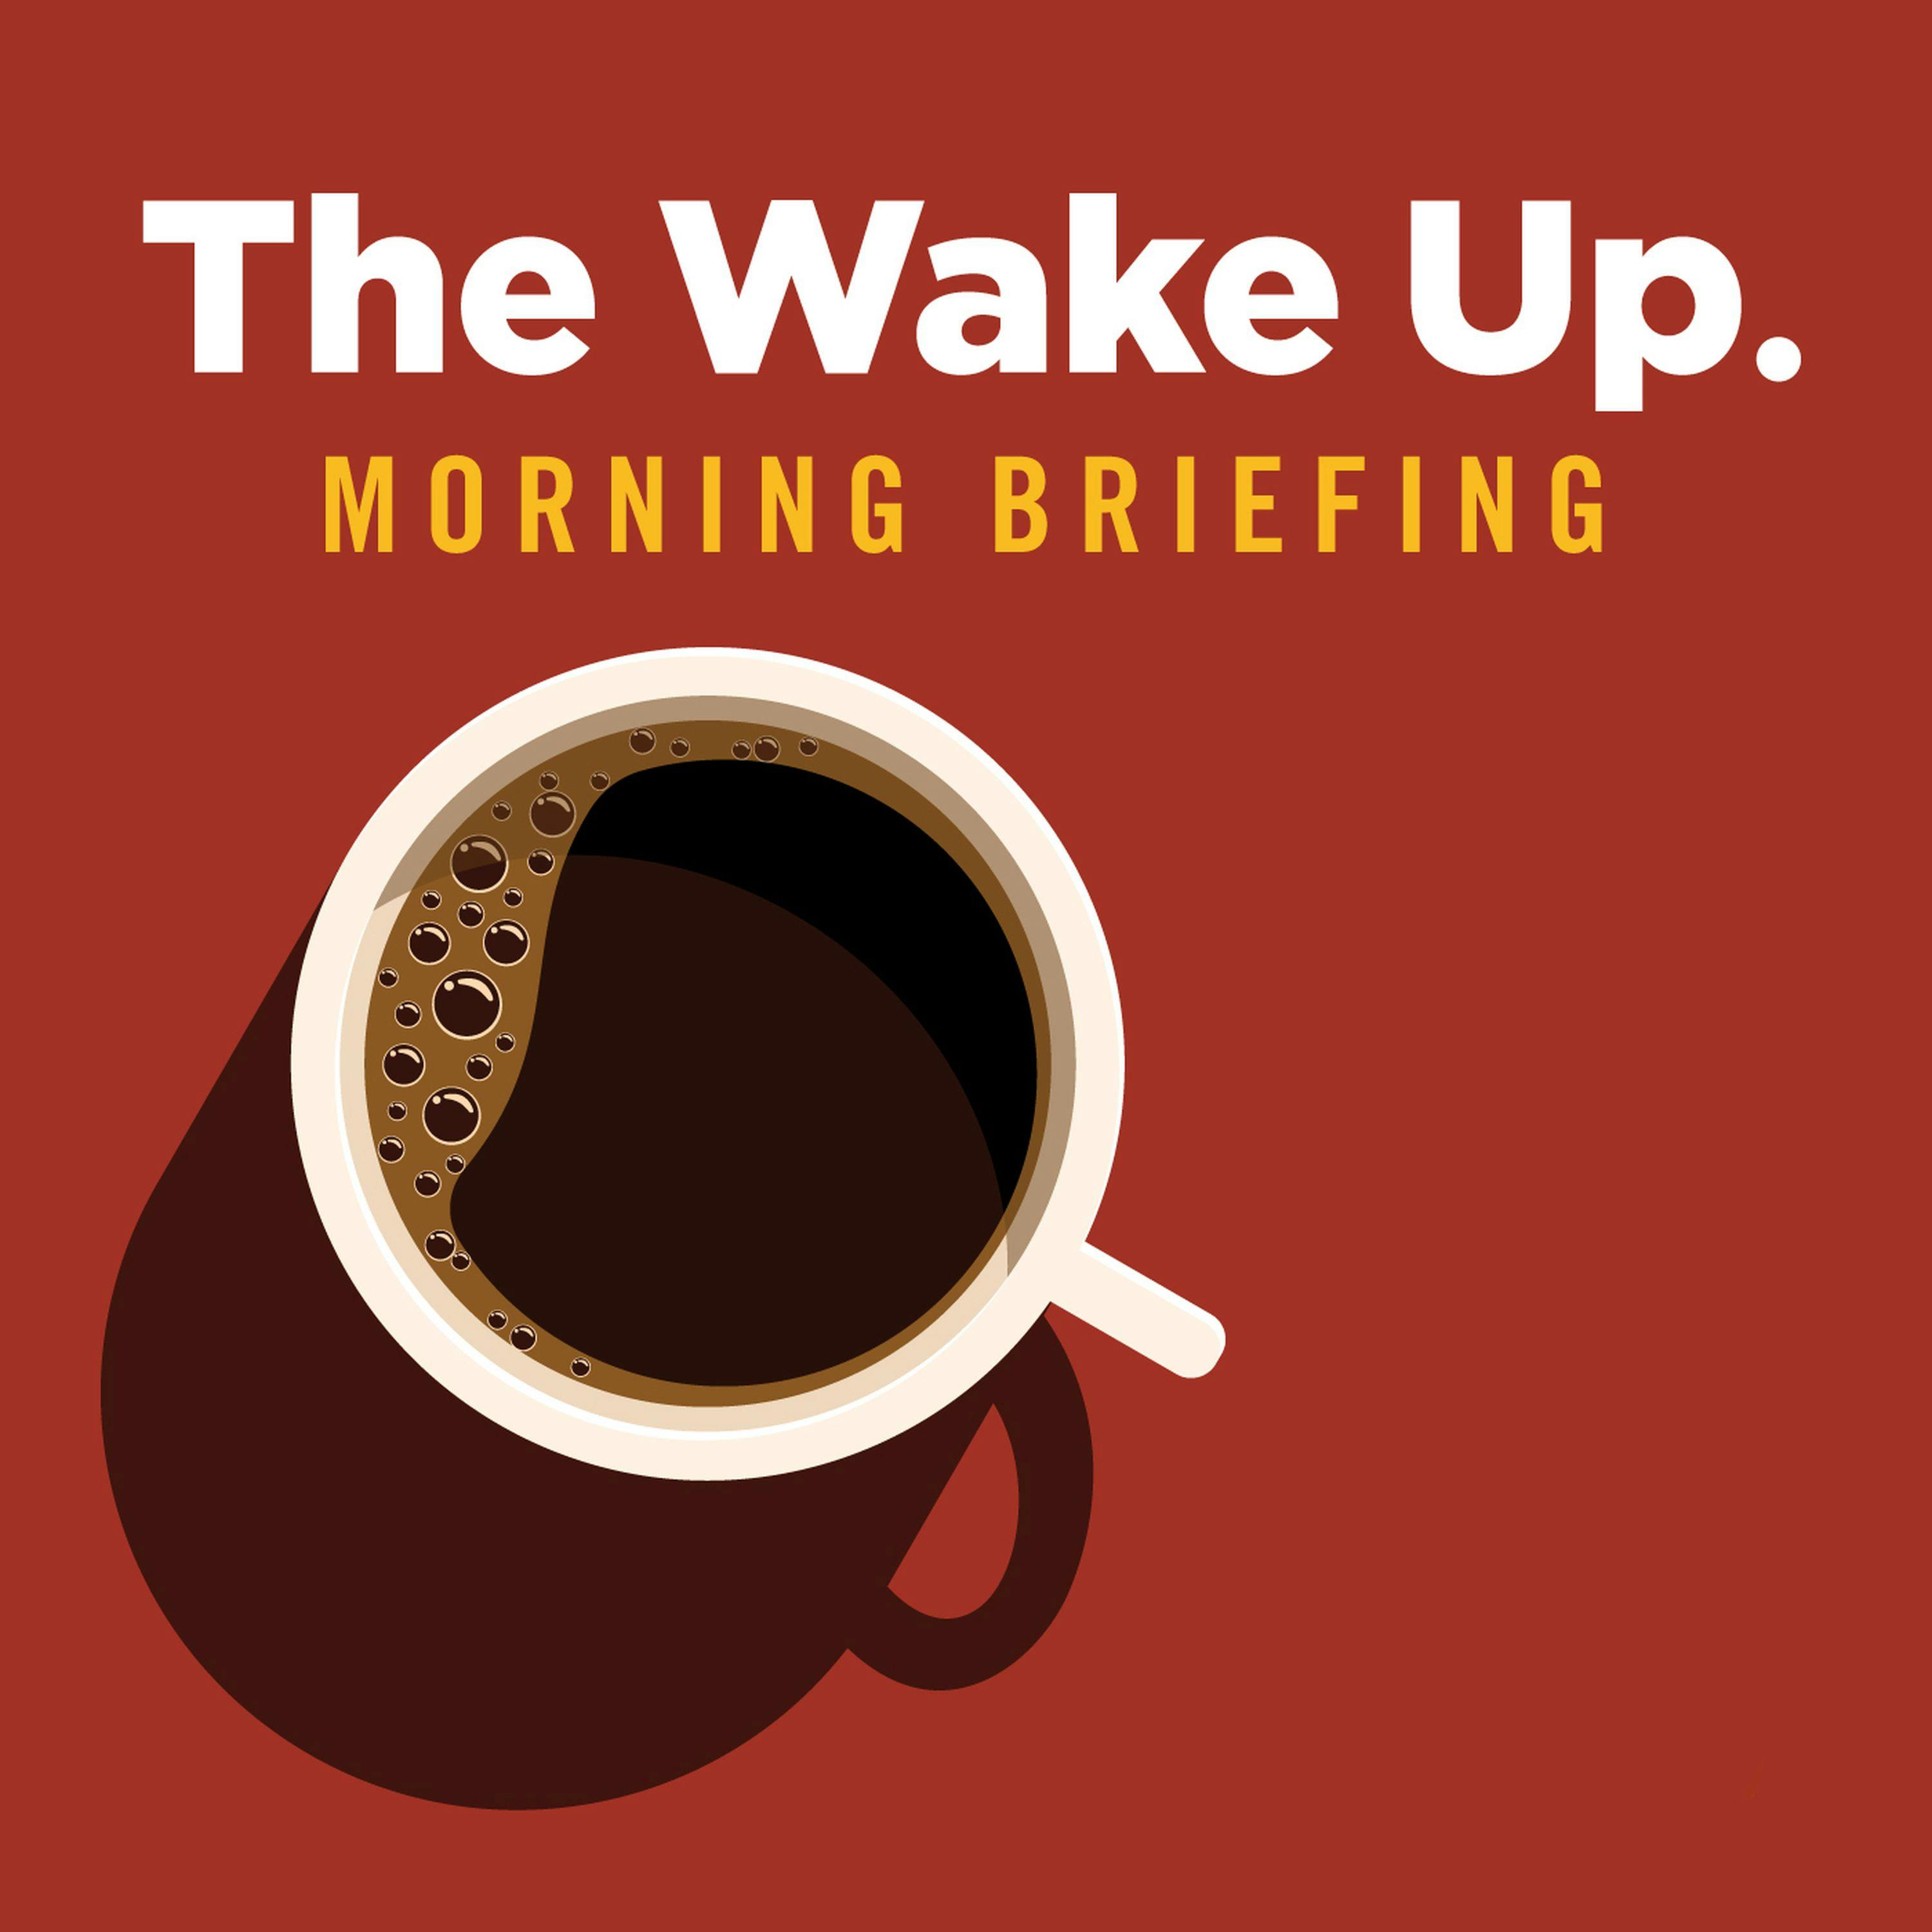 The Wake Up - May 5, 2020 - Coming soon: A date for reopening Ohio restaurants